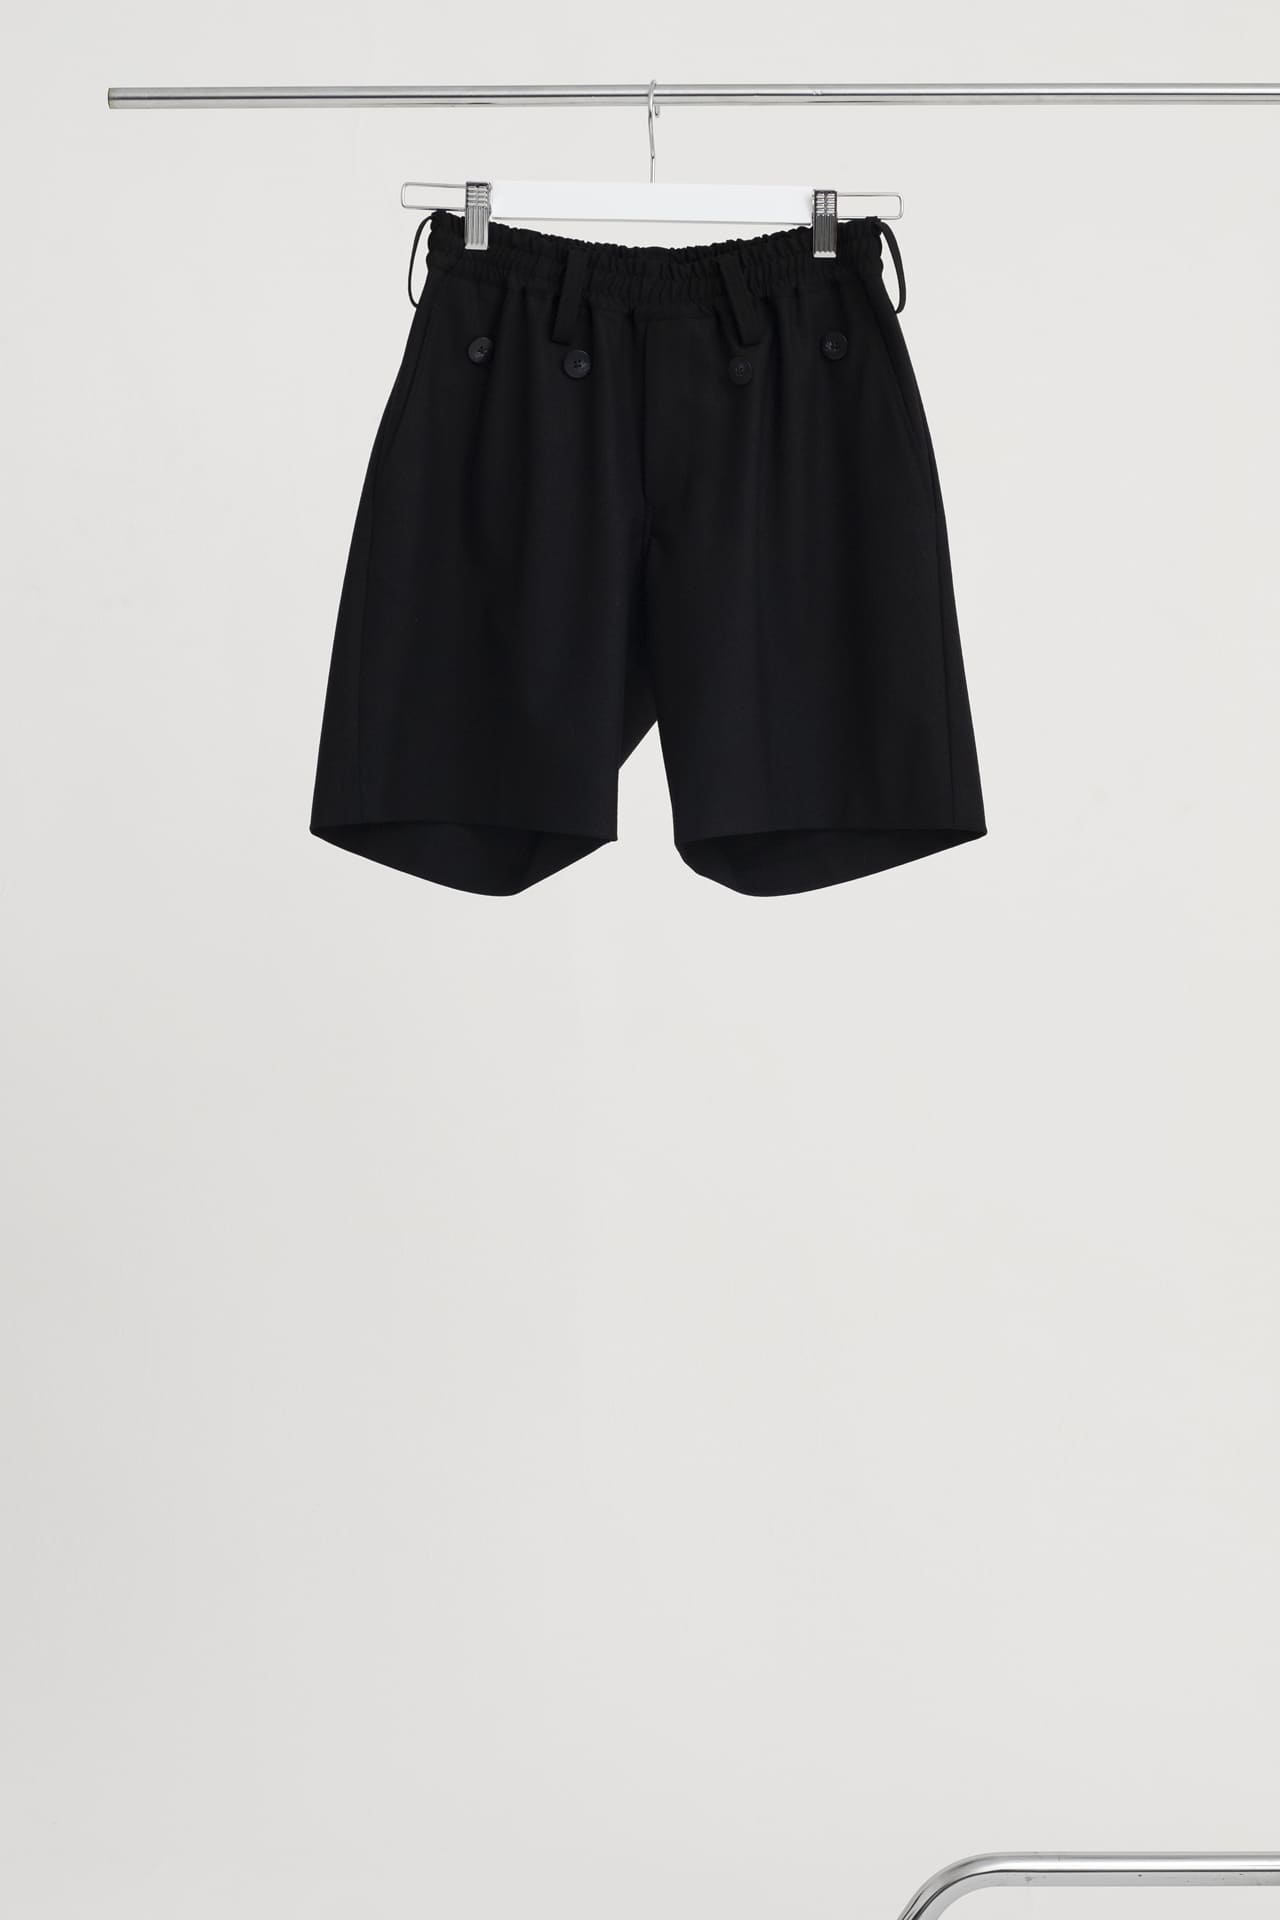 Layer_Shorts Wide Black